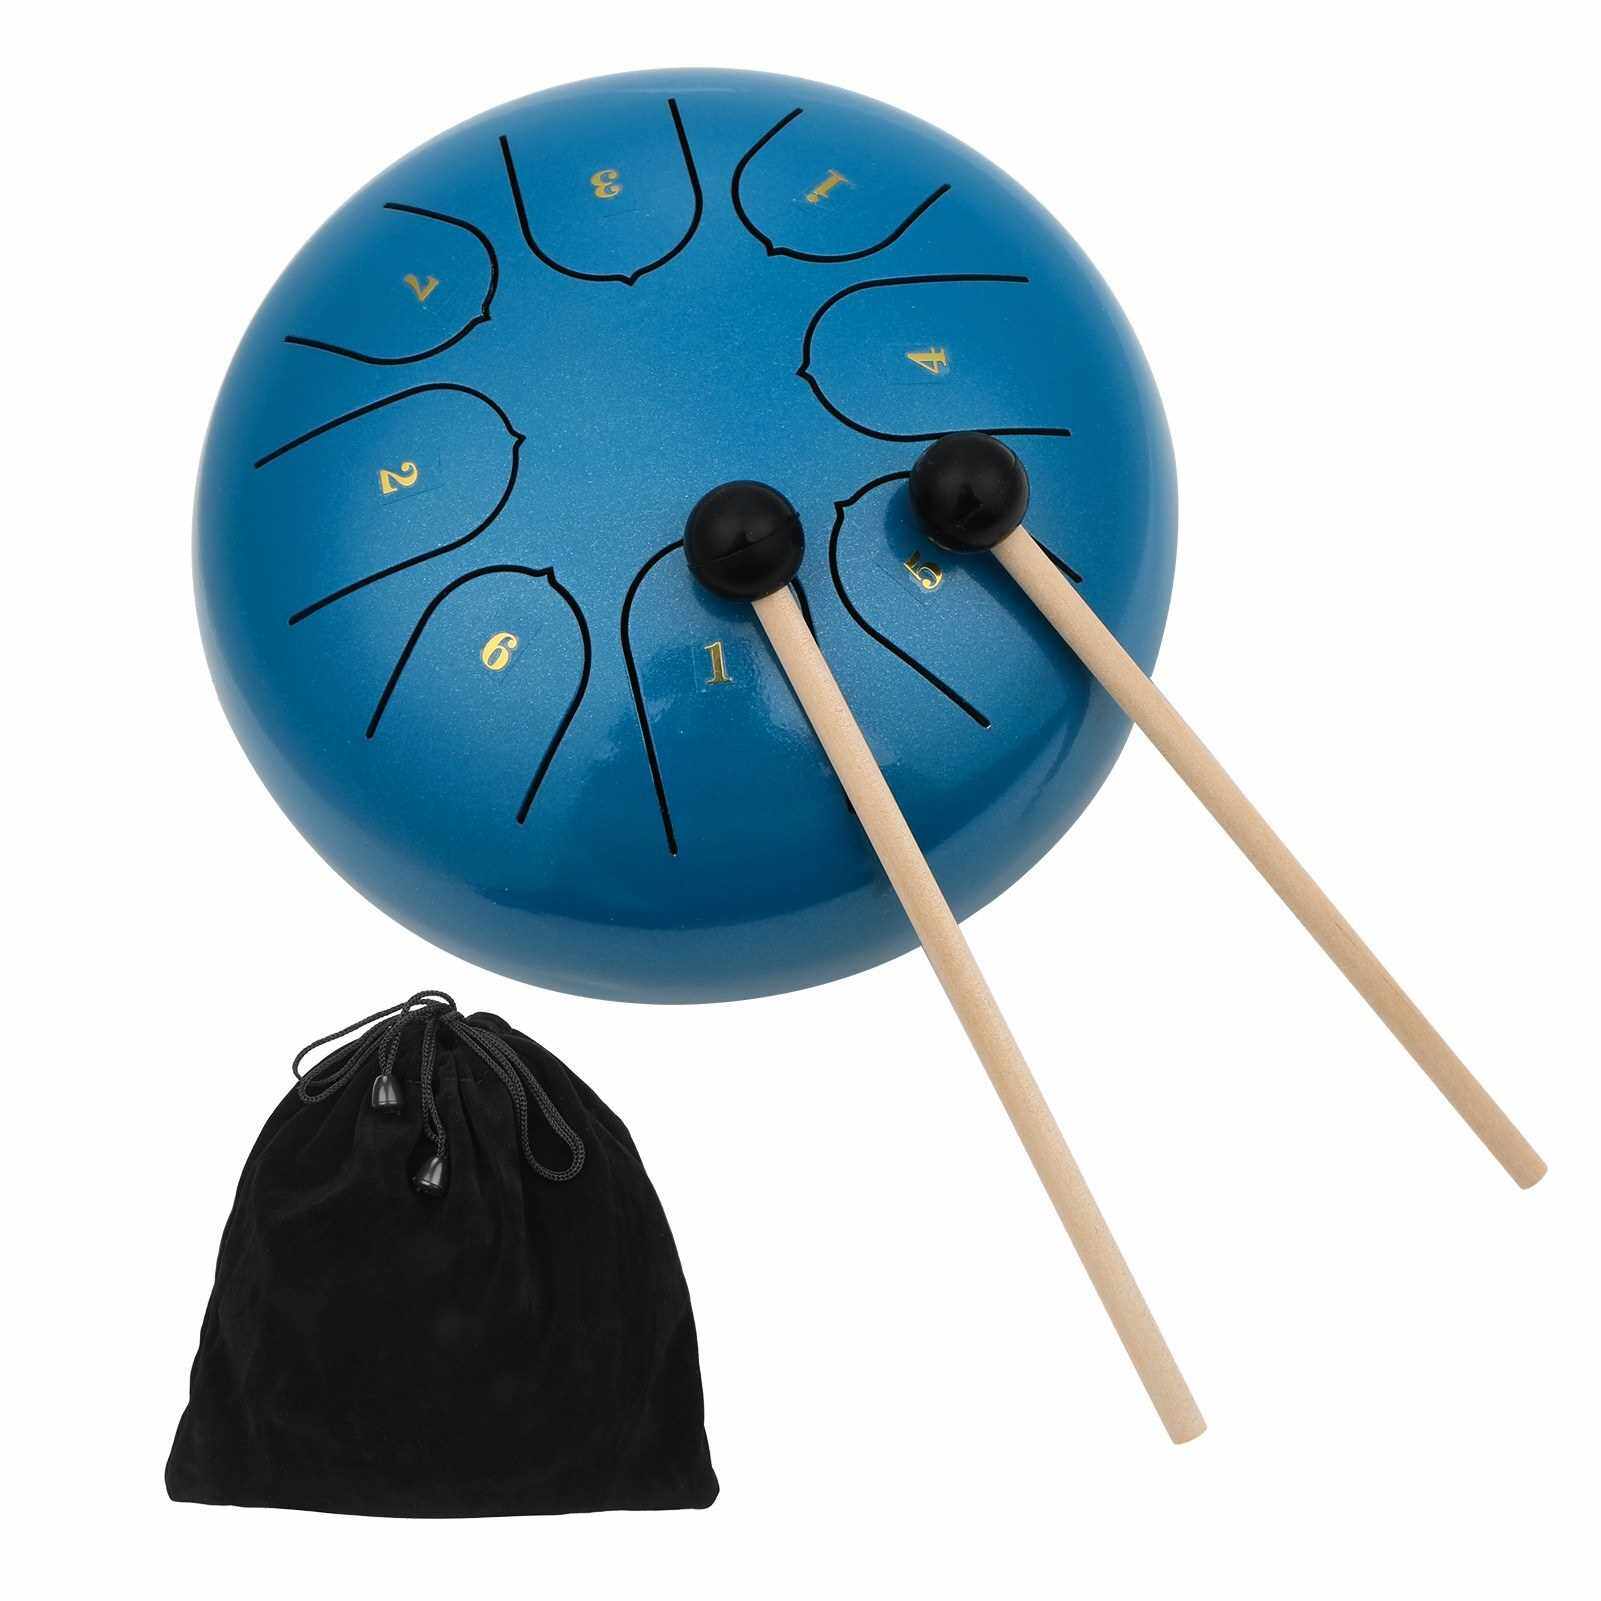 8 Notes C-key 6-inch Mini Steel Tongue Drum Hand Pan Drum Percussion Instrument with Drumsticks for Musical Education Concert Mind Healing Yoga Meditation (Blue)